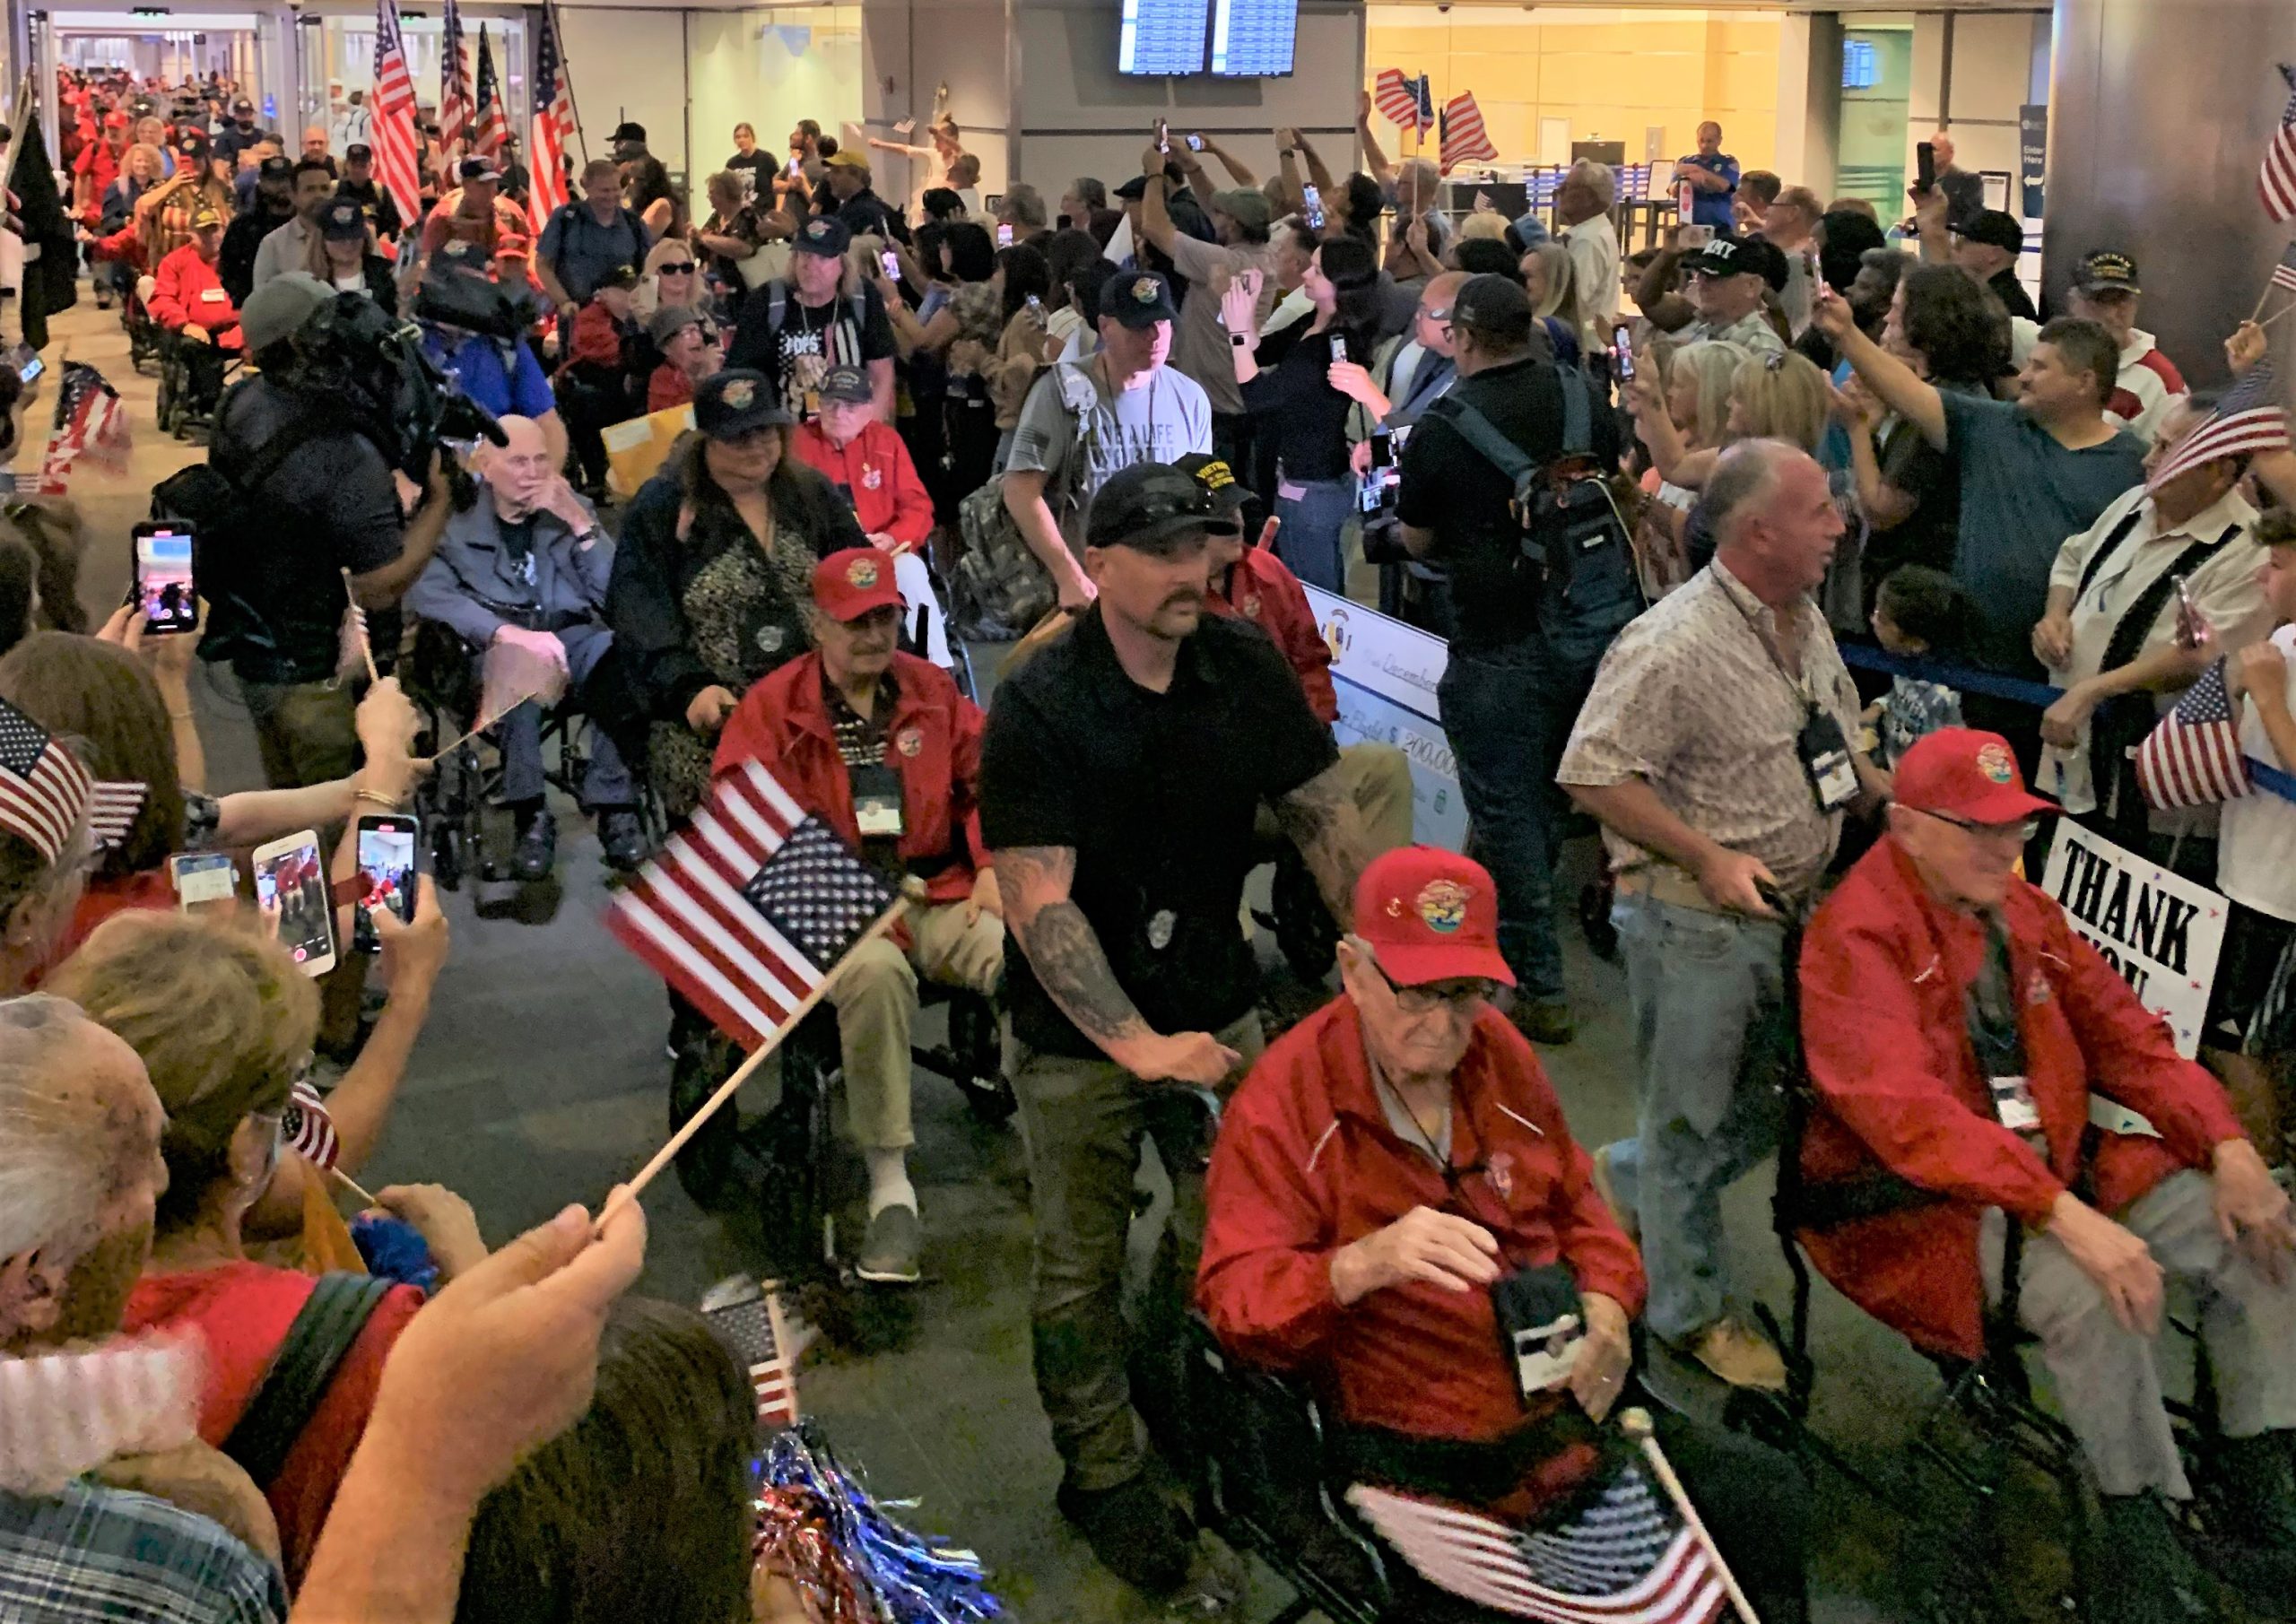 Veterans in wheelchairs are greeted by cheering crowd.